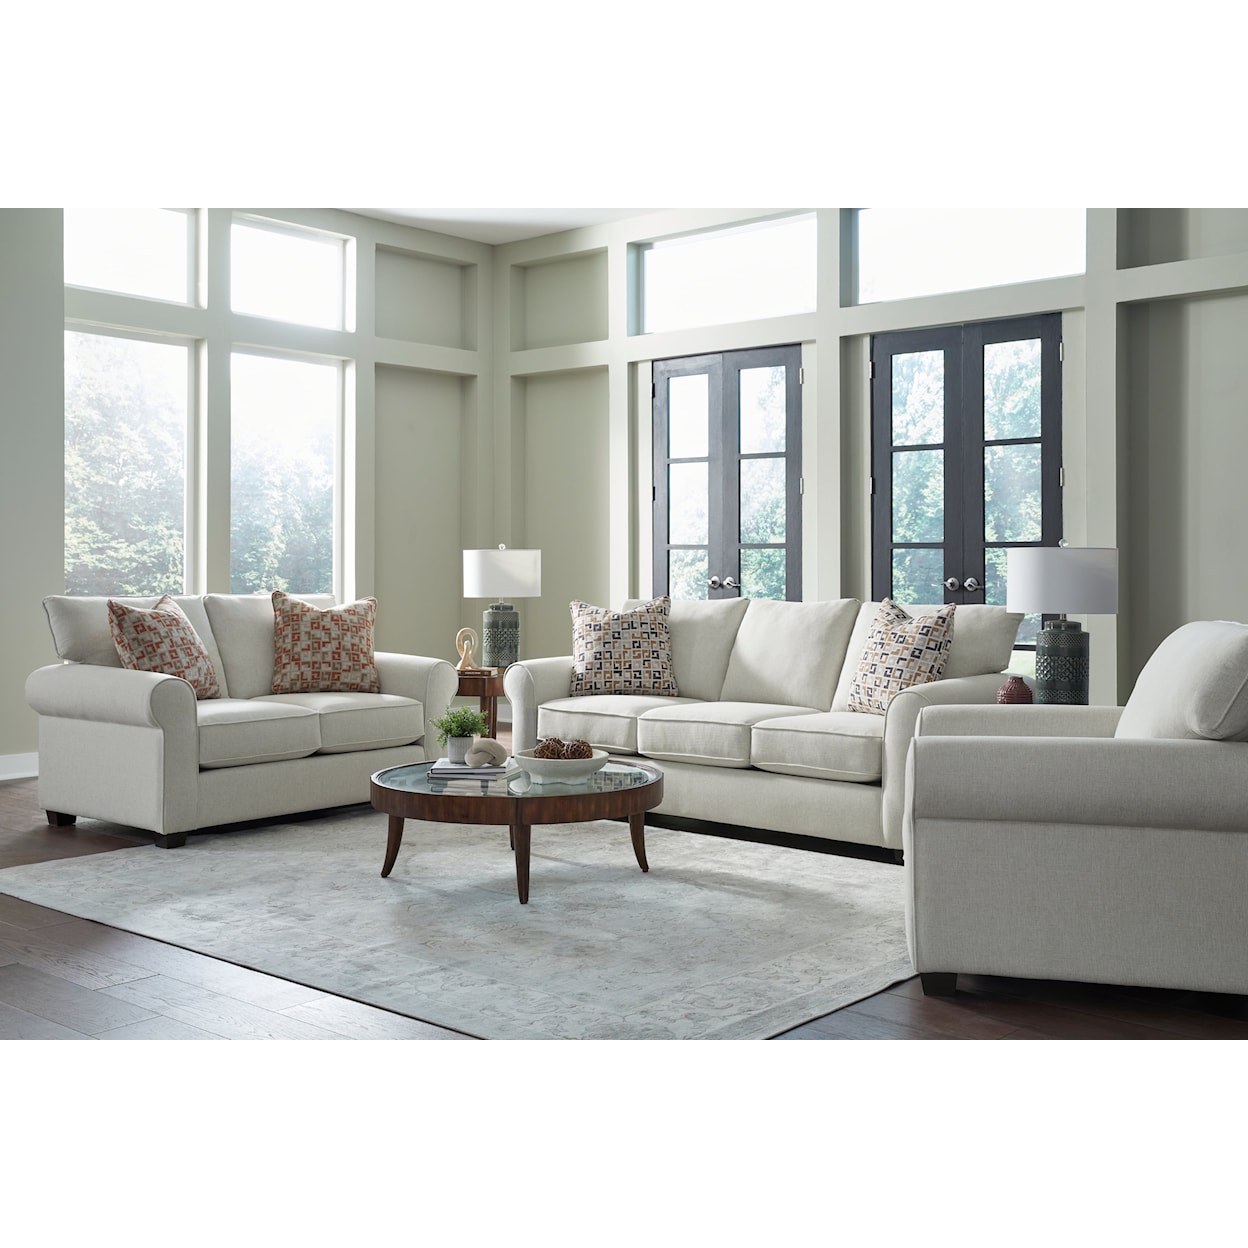 The Mix Collins Loveseat